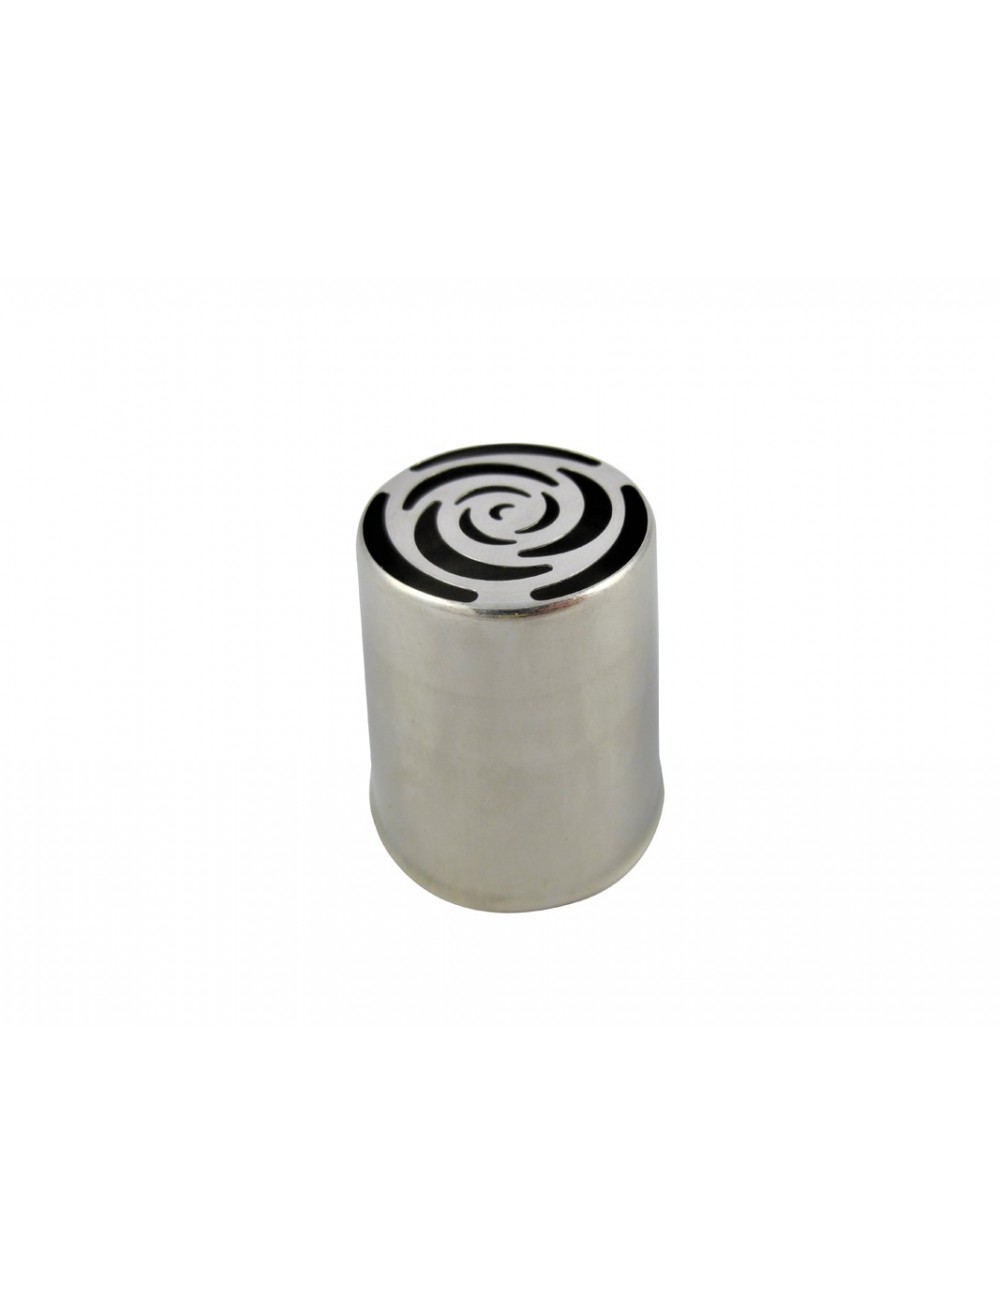 STAINLESS STEEL FLOWER DESIGN NOZZLE